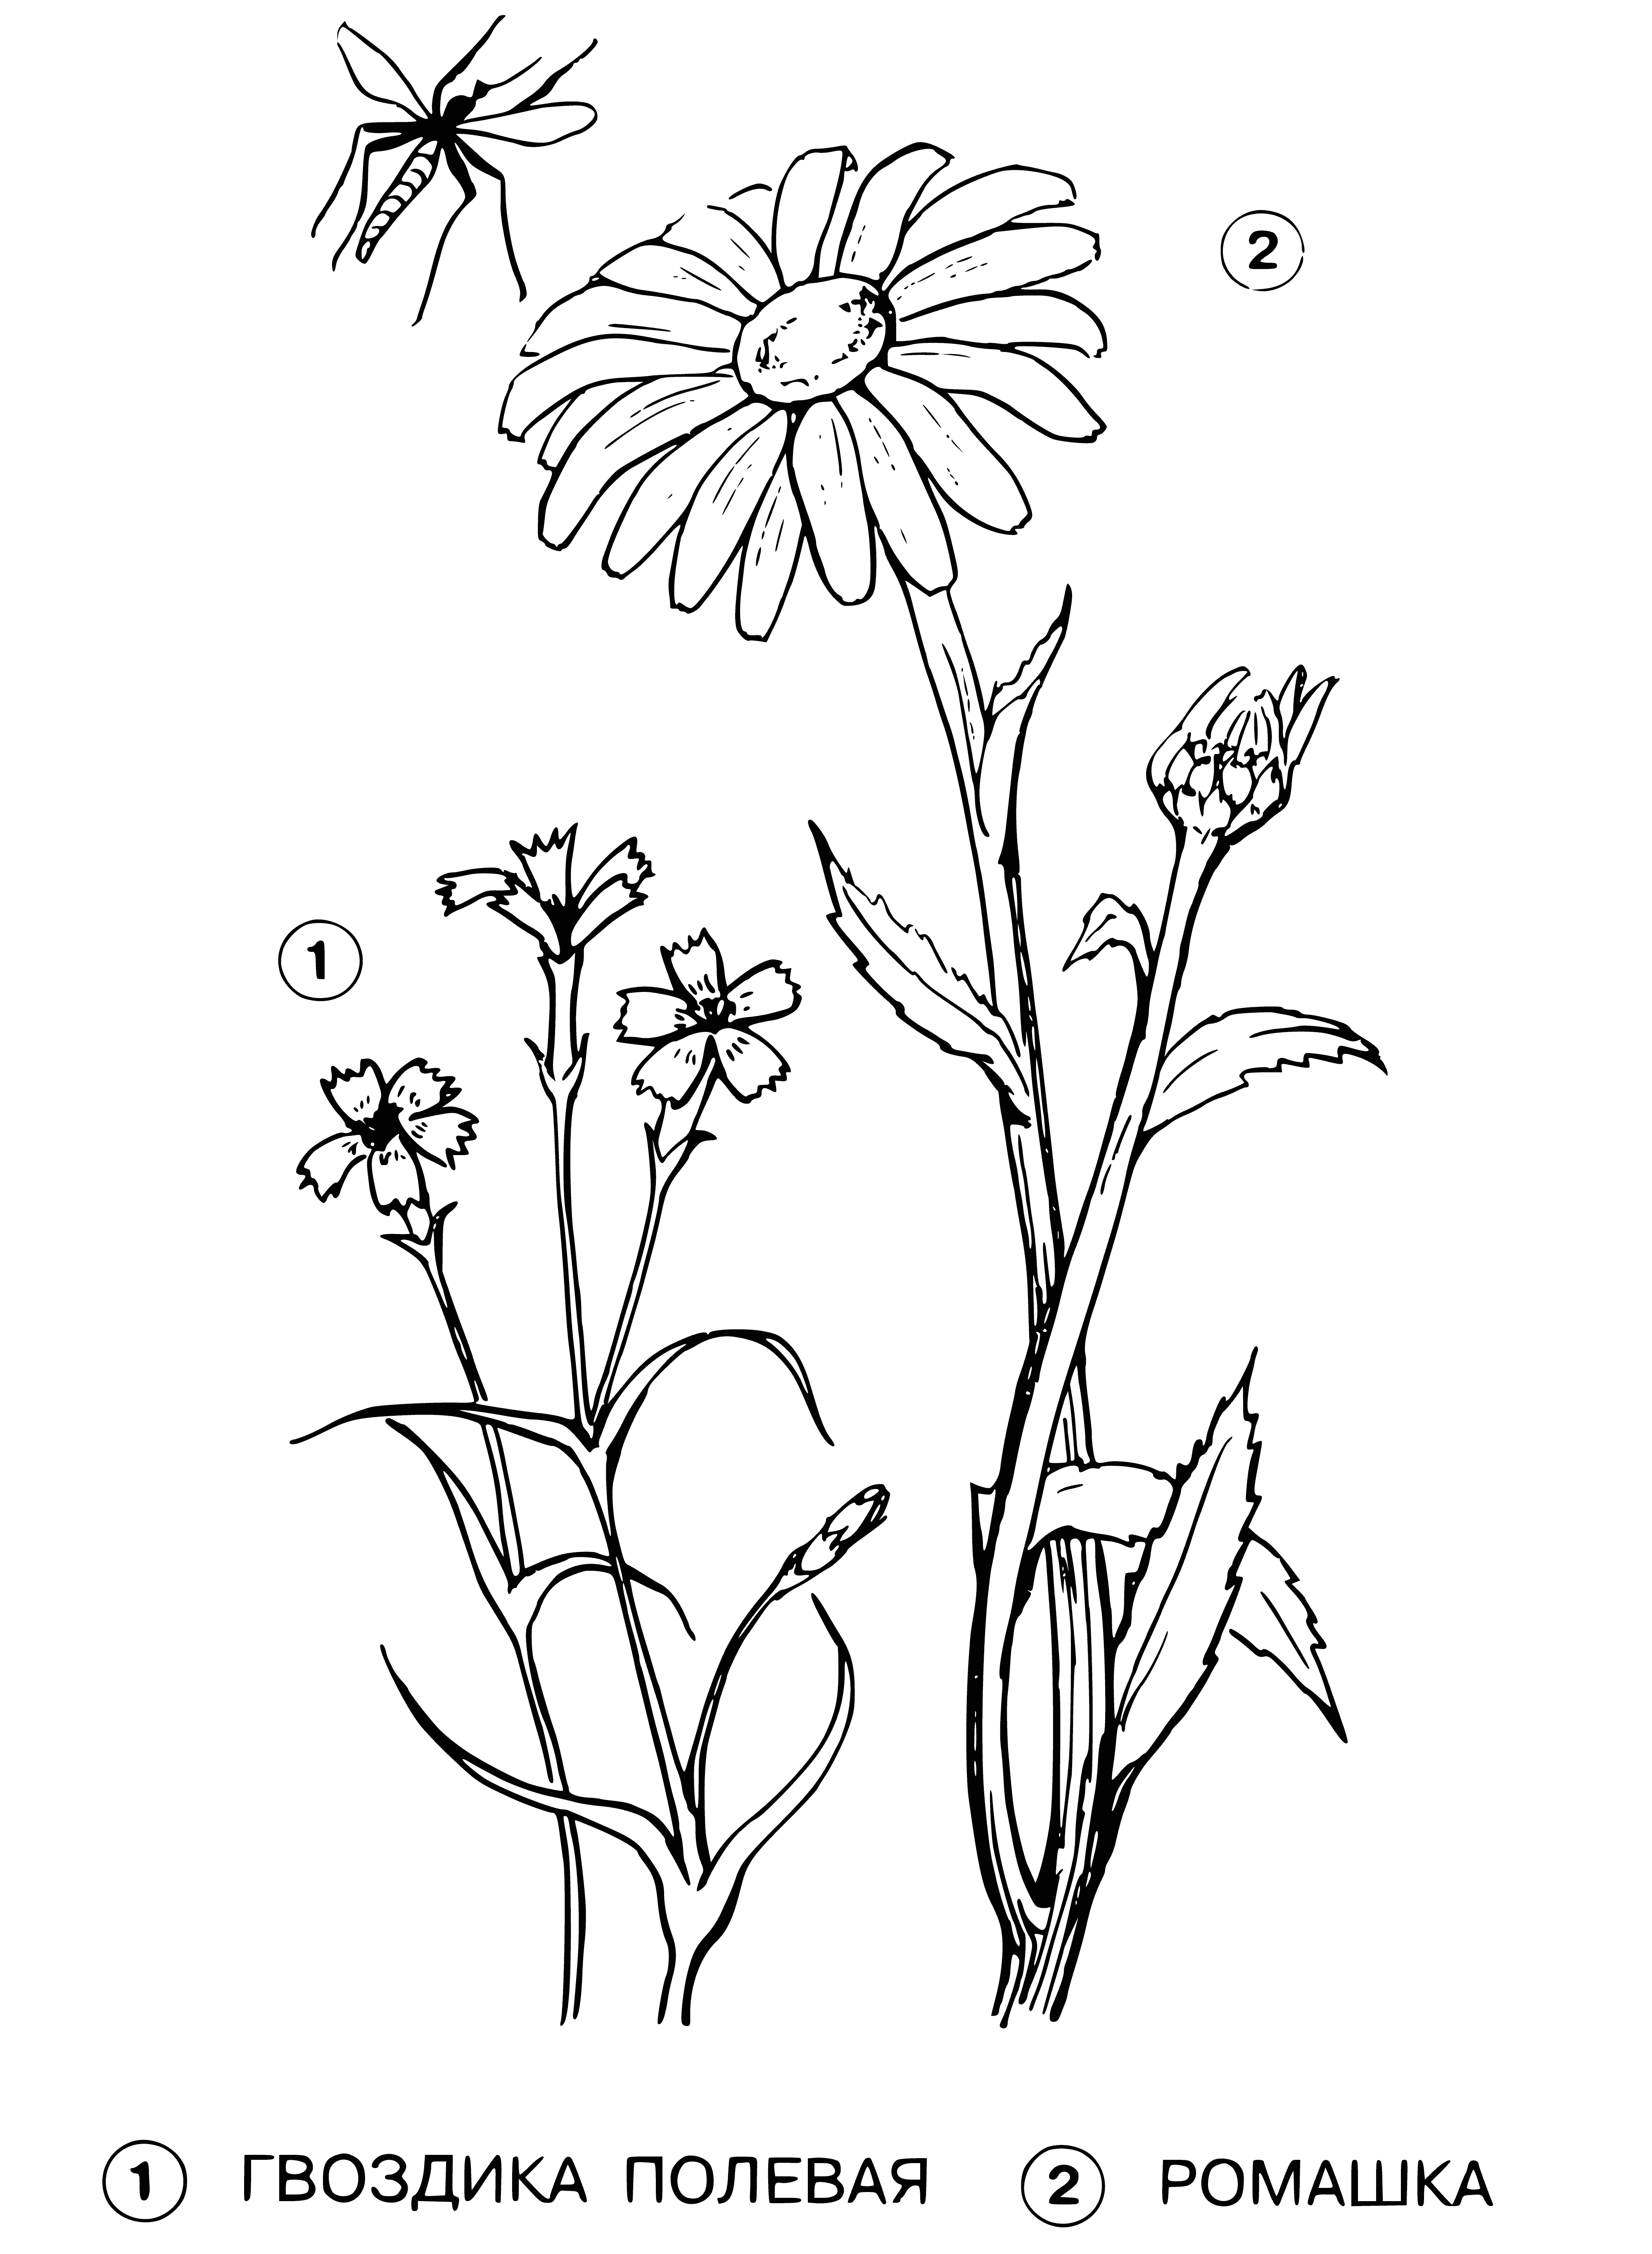 coloring page: Two types of flowers coloring paged: carnations (pink, green stem) & field chamomile (white/yellow center, green leaves).